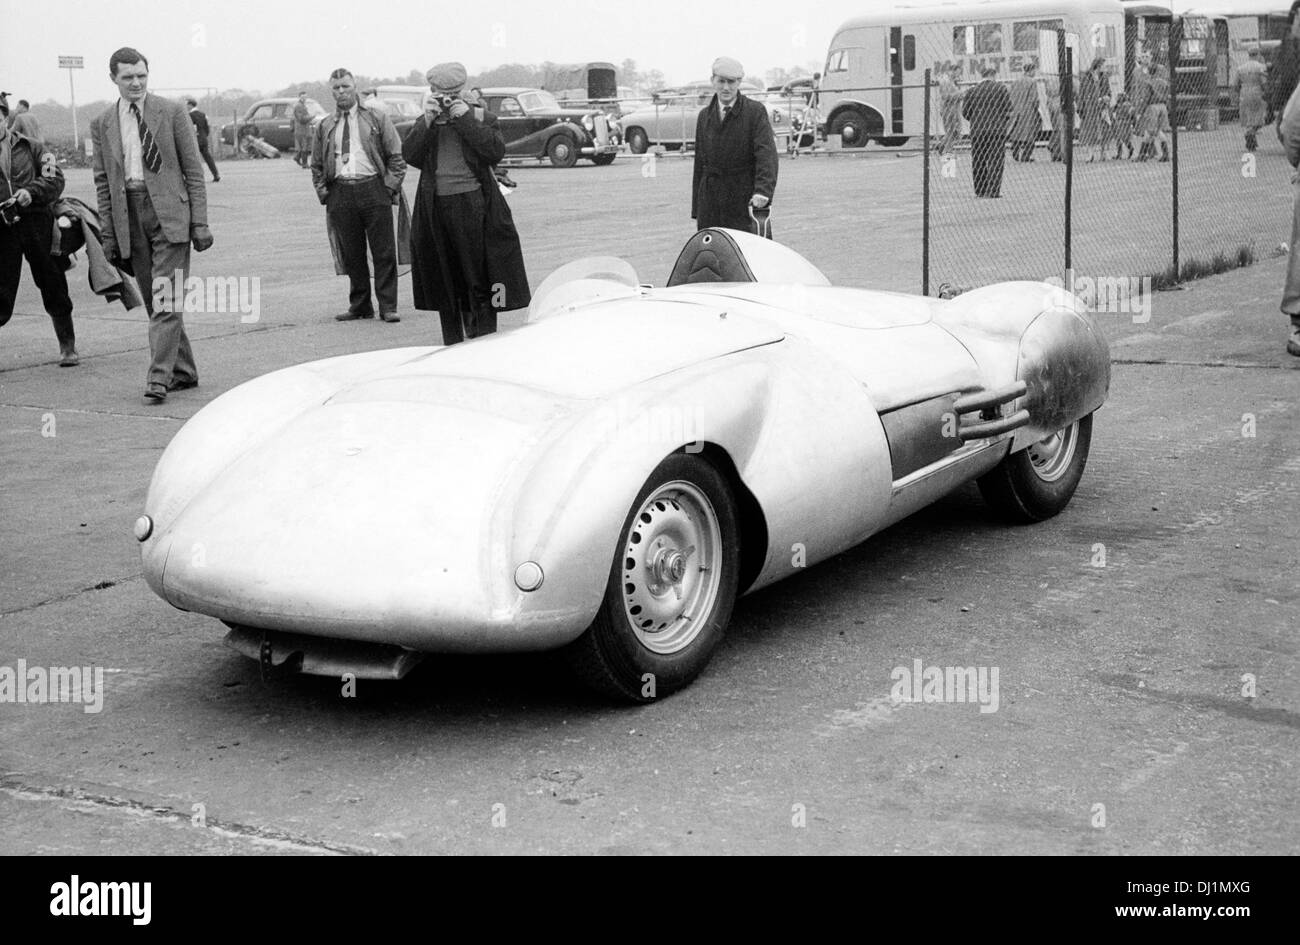 Peter Whitehead's brand-new Cooper-Jaguar sports car at the International Trophy meeting, Silverstone, England 1954. Stock Photo